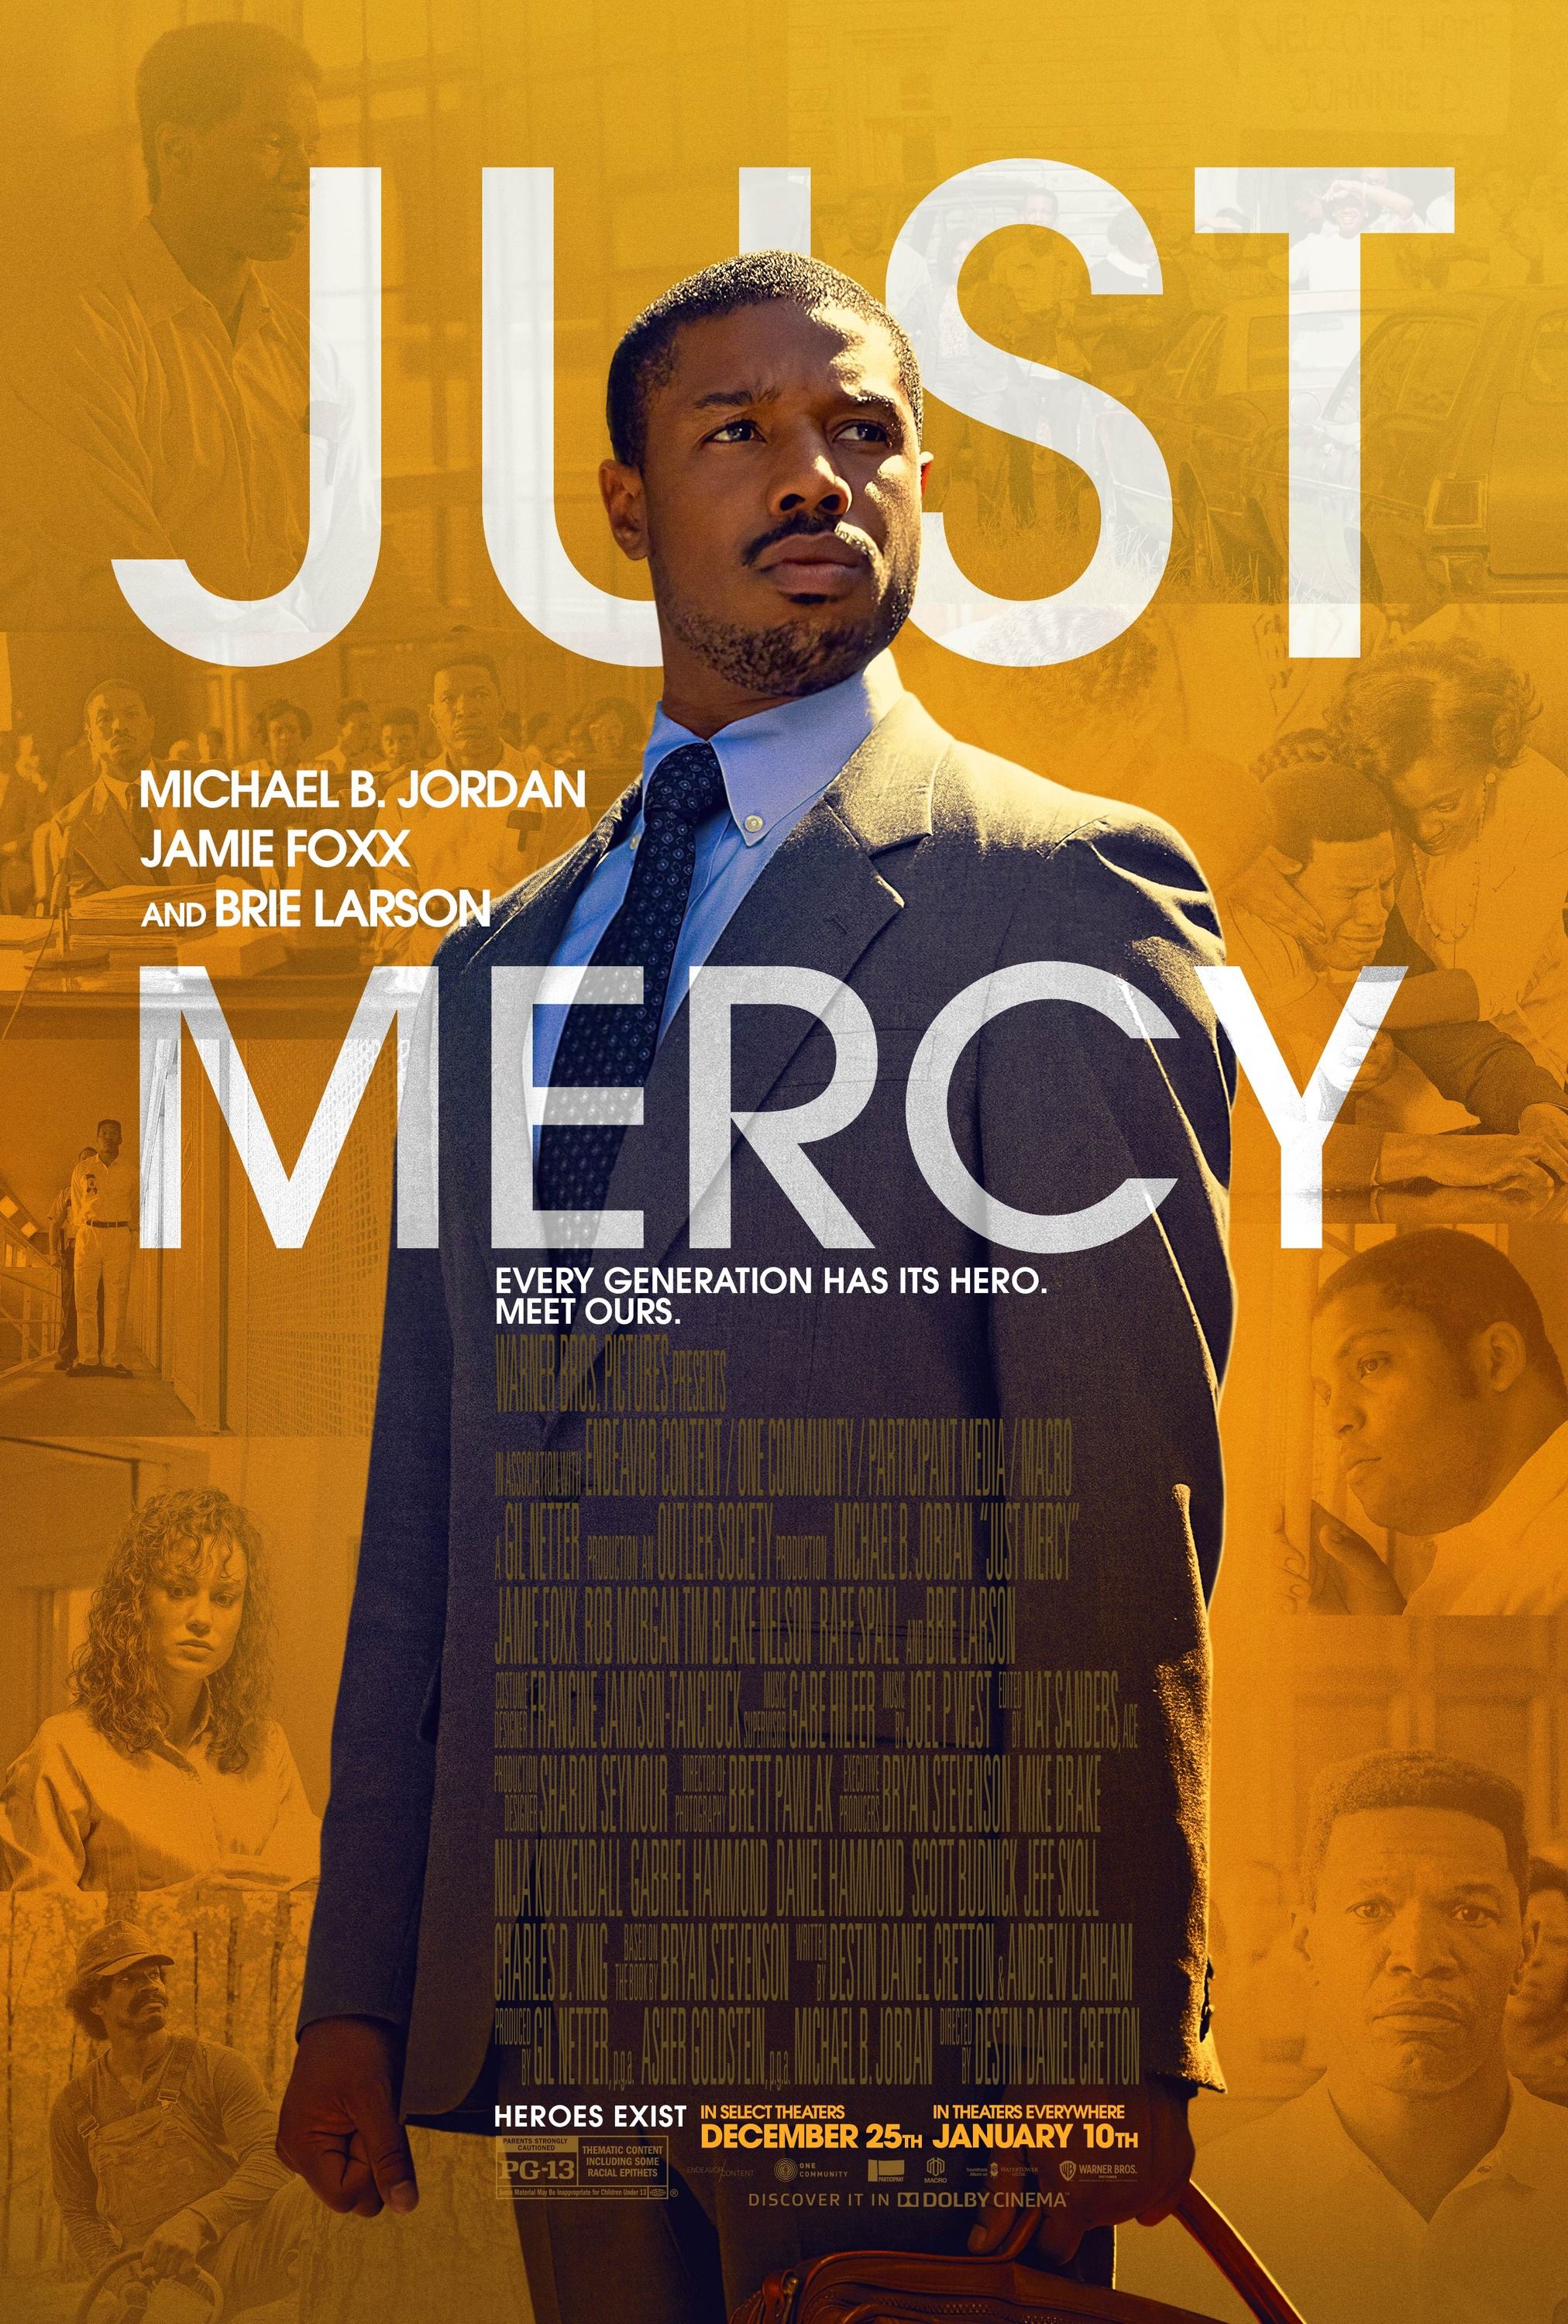 Just Mercy movie official poster